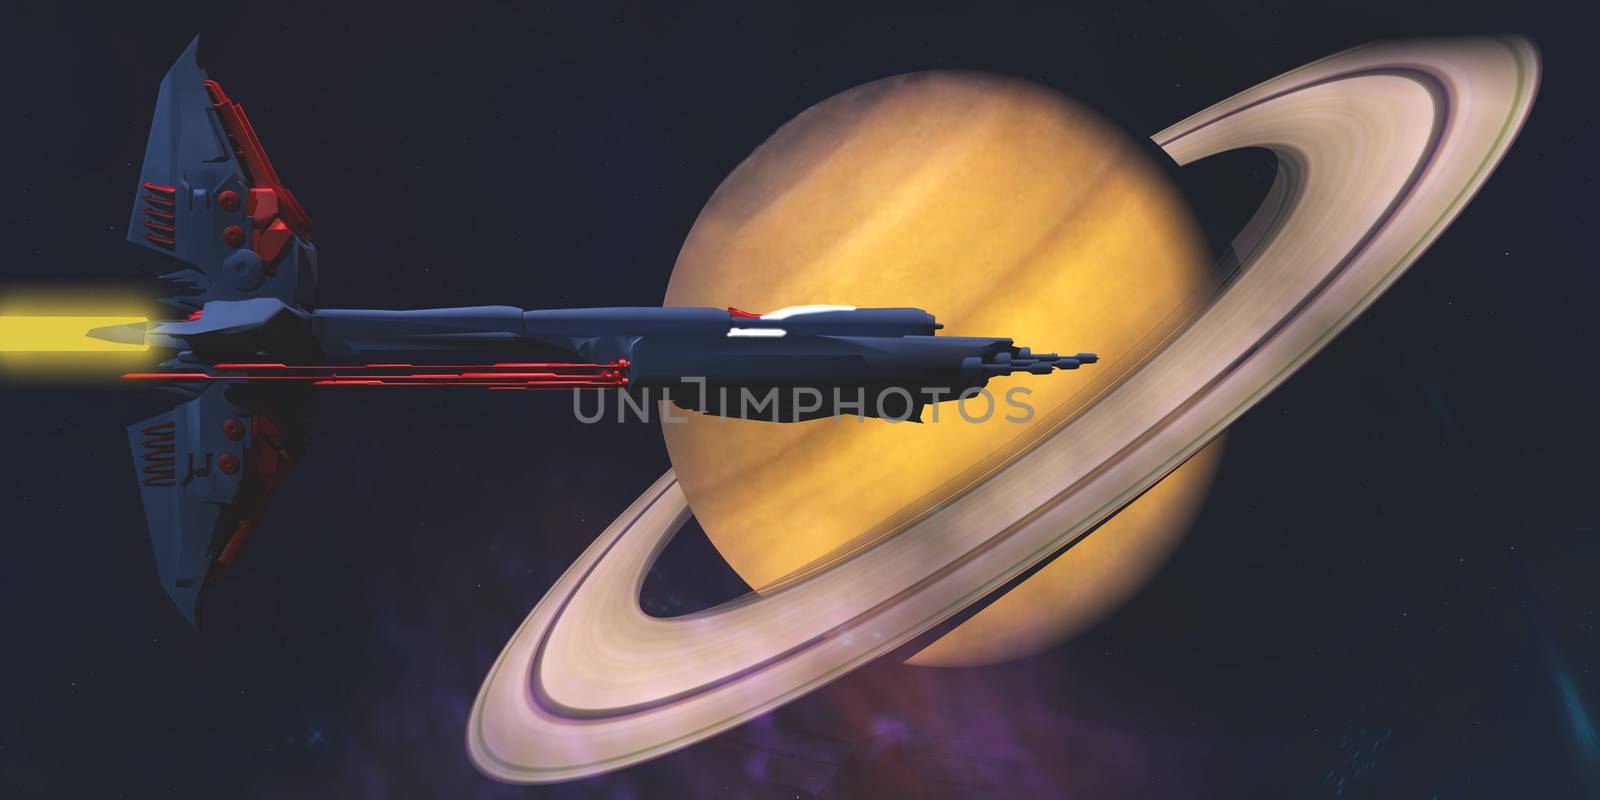 A spaceship from Earth comes to visit the planet of Saturn.